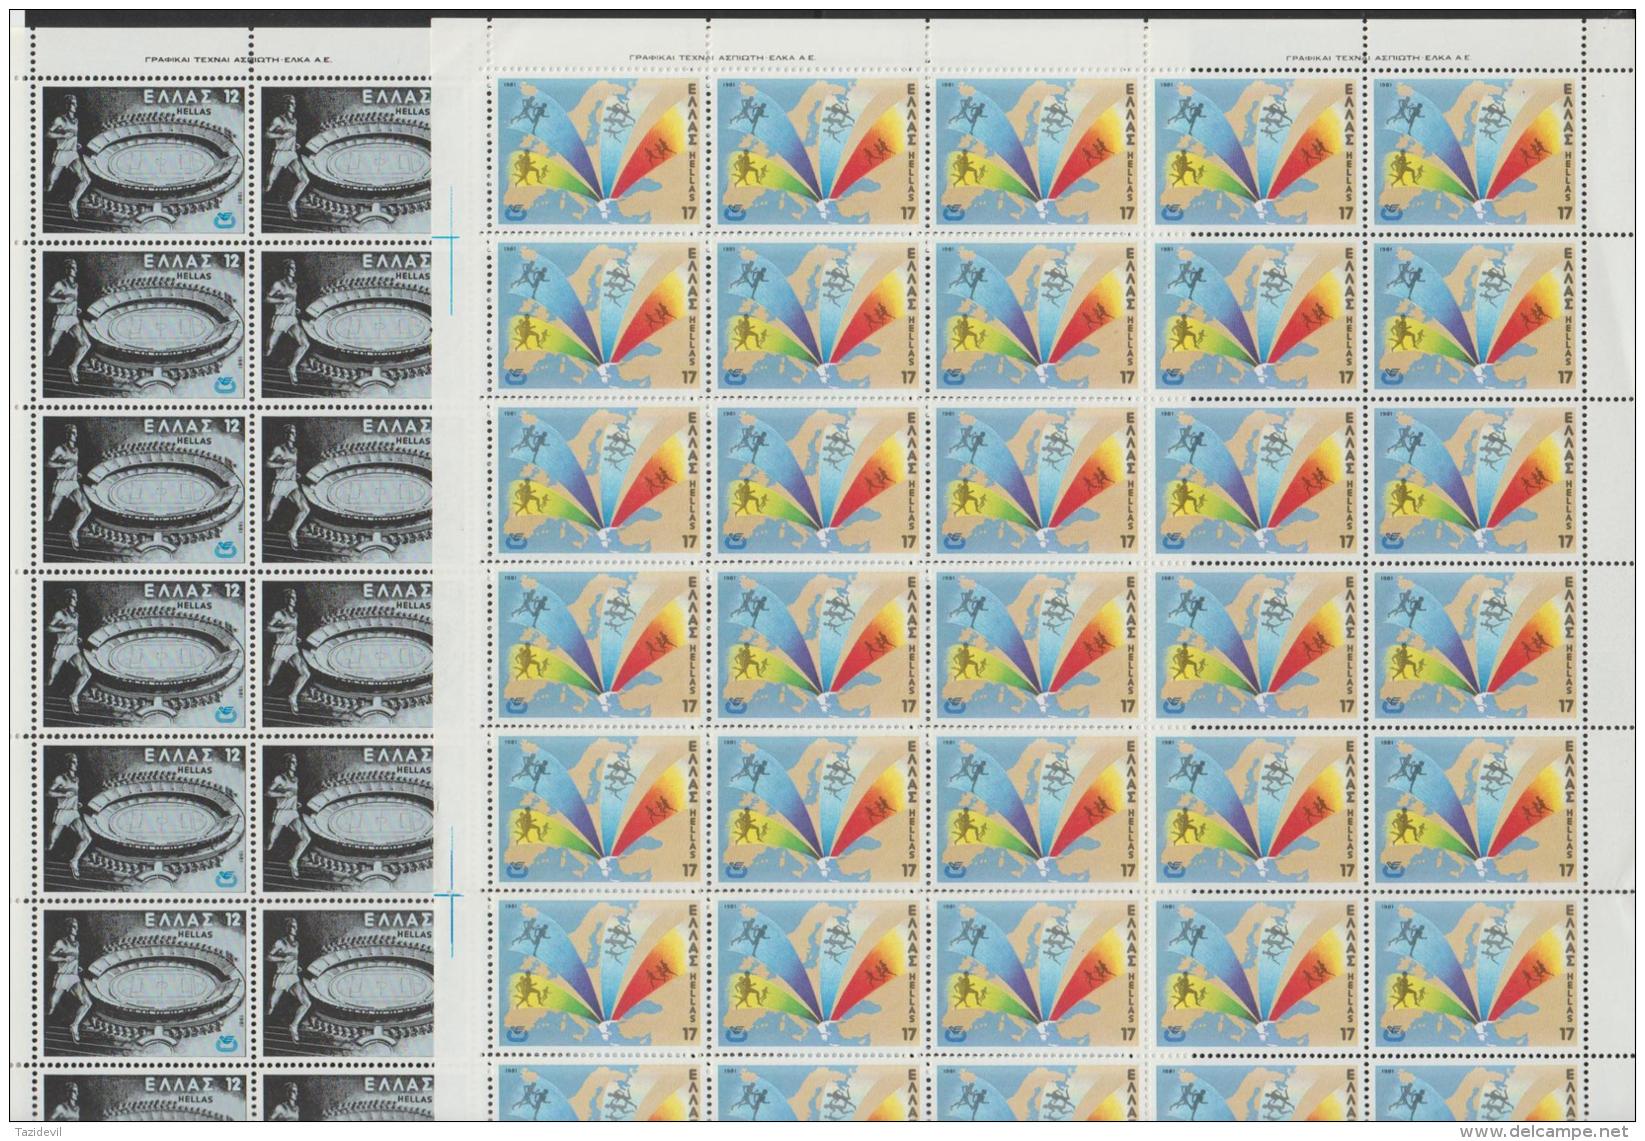 GREECE - 1981 Athletic Championships - Olympic Stadium Part Sheets Of 45. Scott 1388-89. MNH ** Priced To Clear - Volledige & Onvolledige Vellen